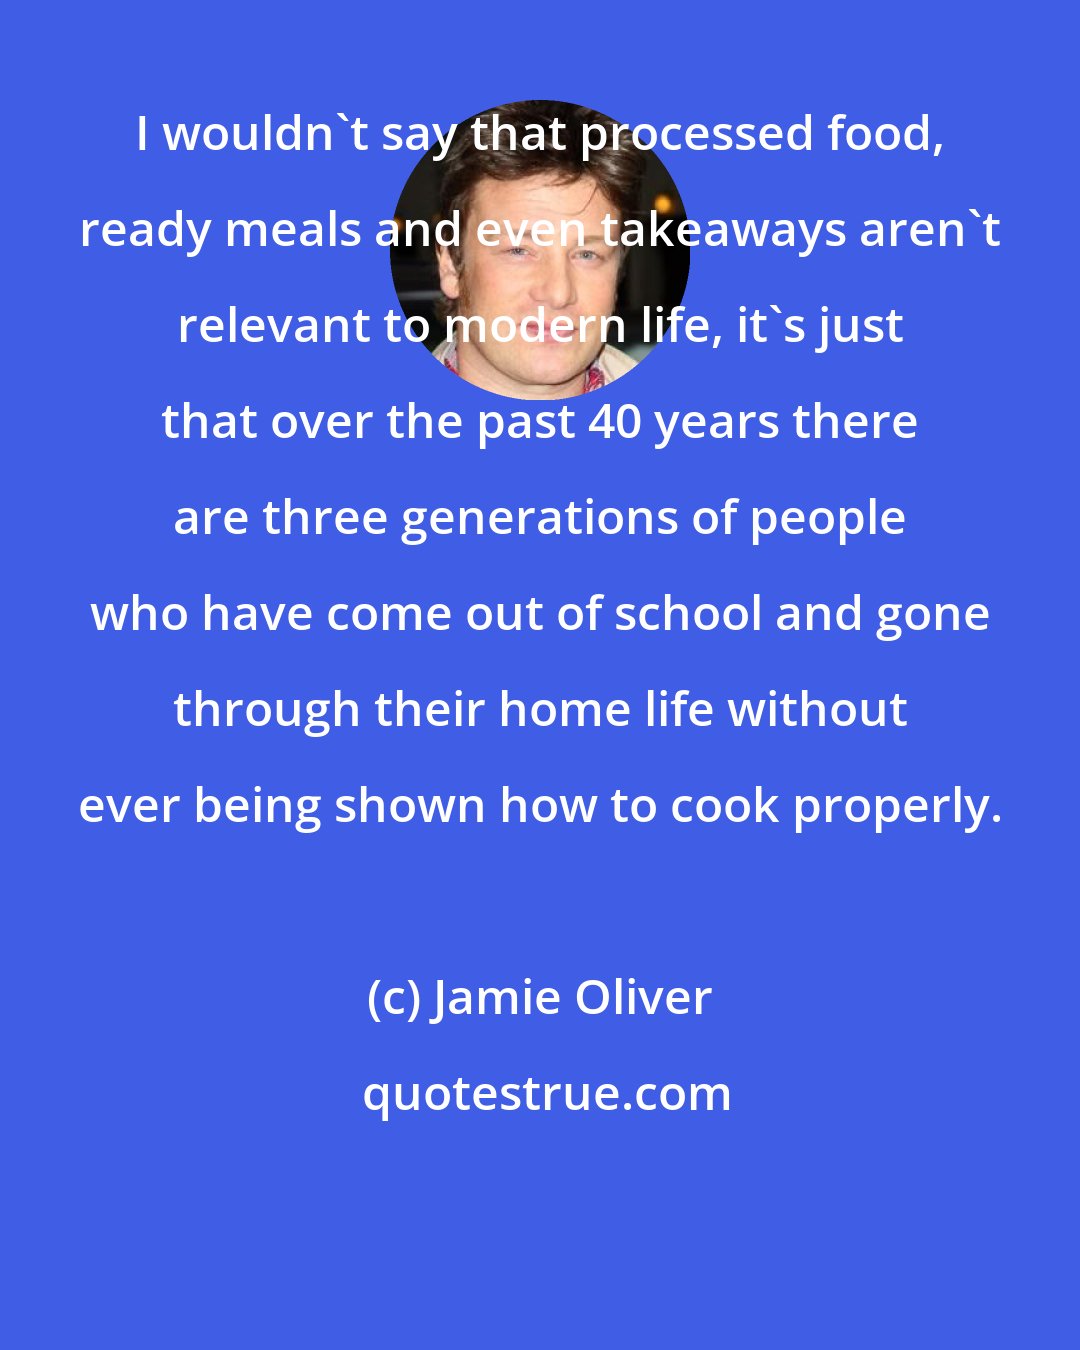 Jamie Oliver: I wouldn't say that processed food, ready meals and even takeaways aren't relevant to modern life, it's just that over the past 40 years there are three generations of people who have come out of school and gone through their home life without ever being shown how to cook properly.